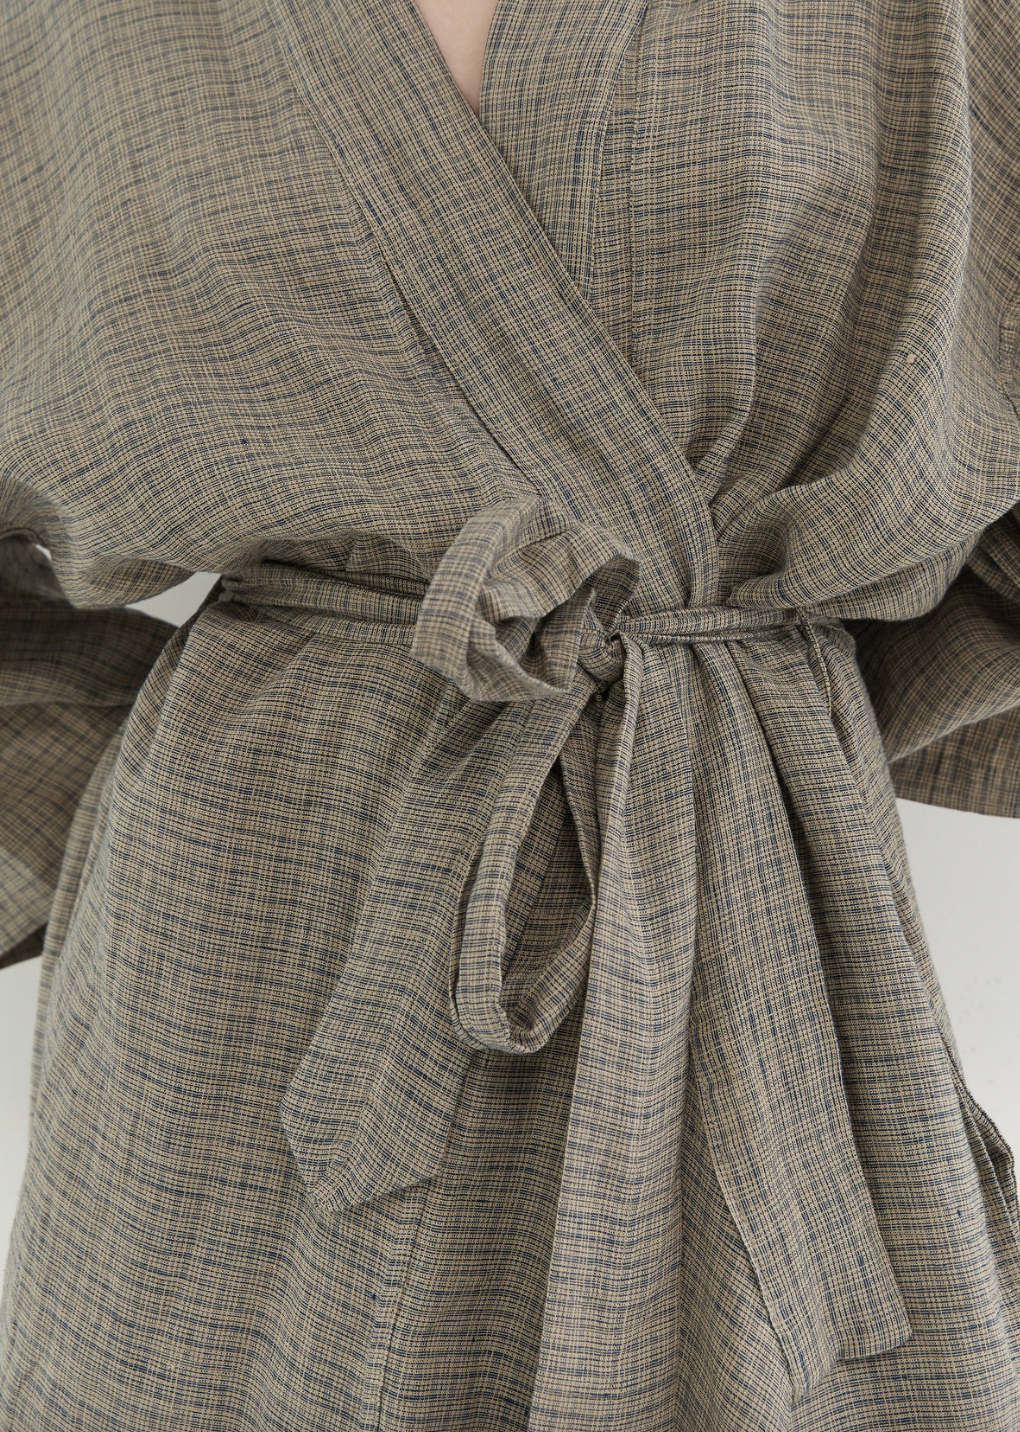 Product Image for The 02 Robe, Linen Check